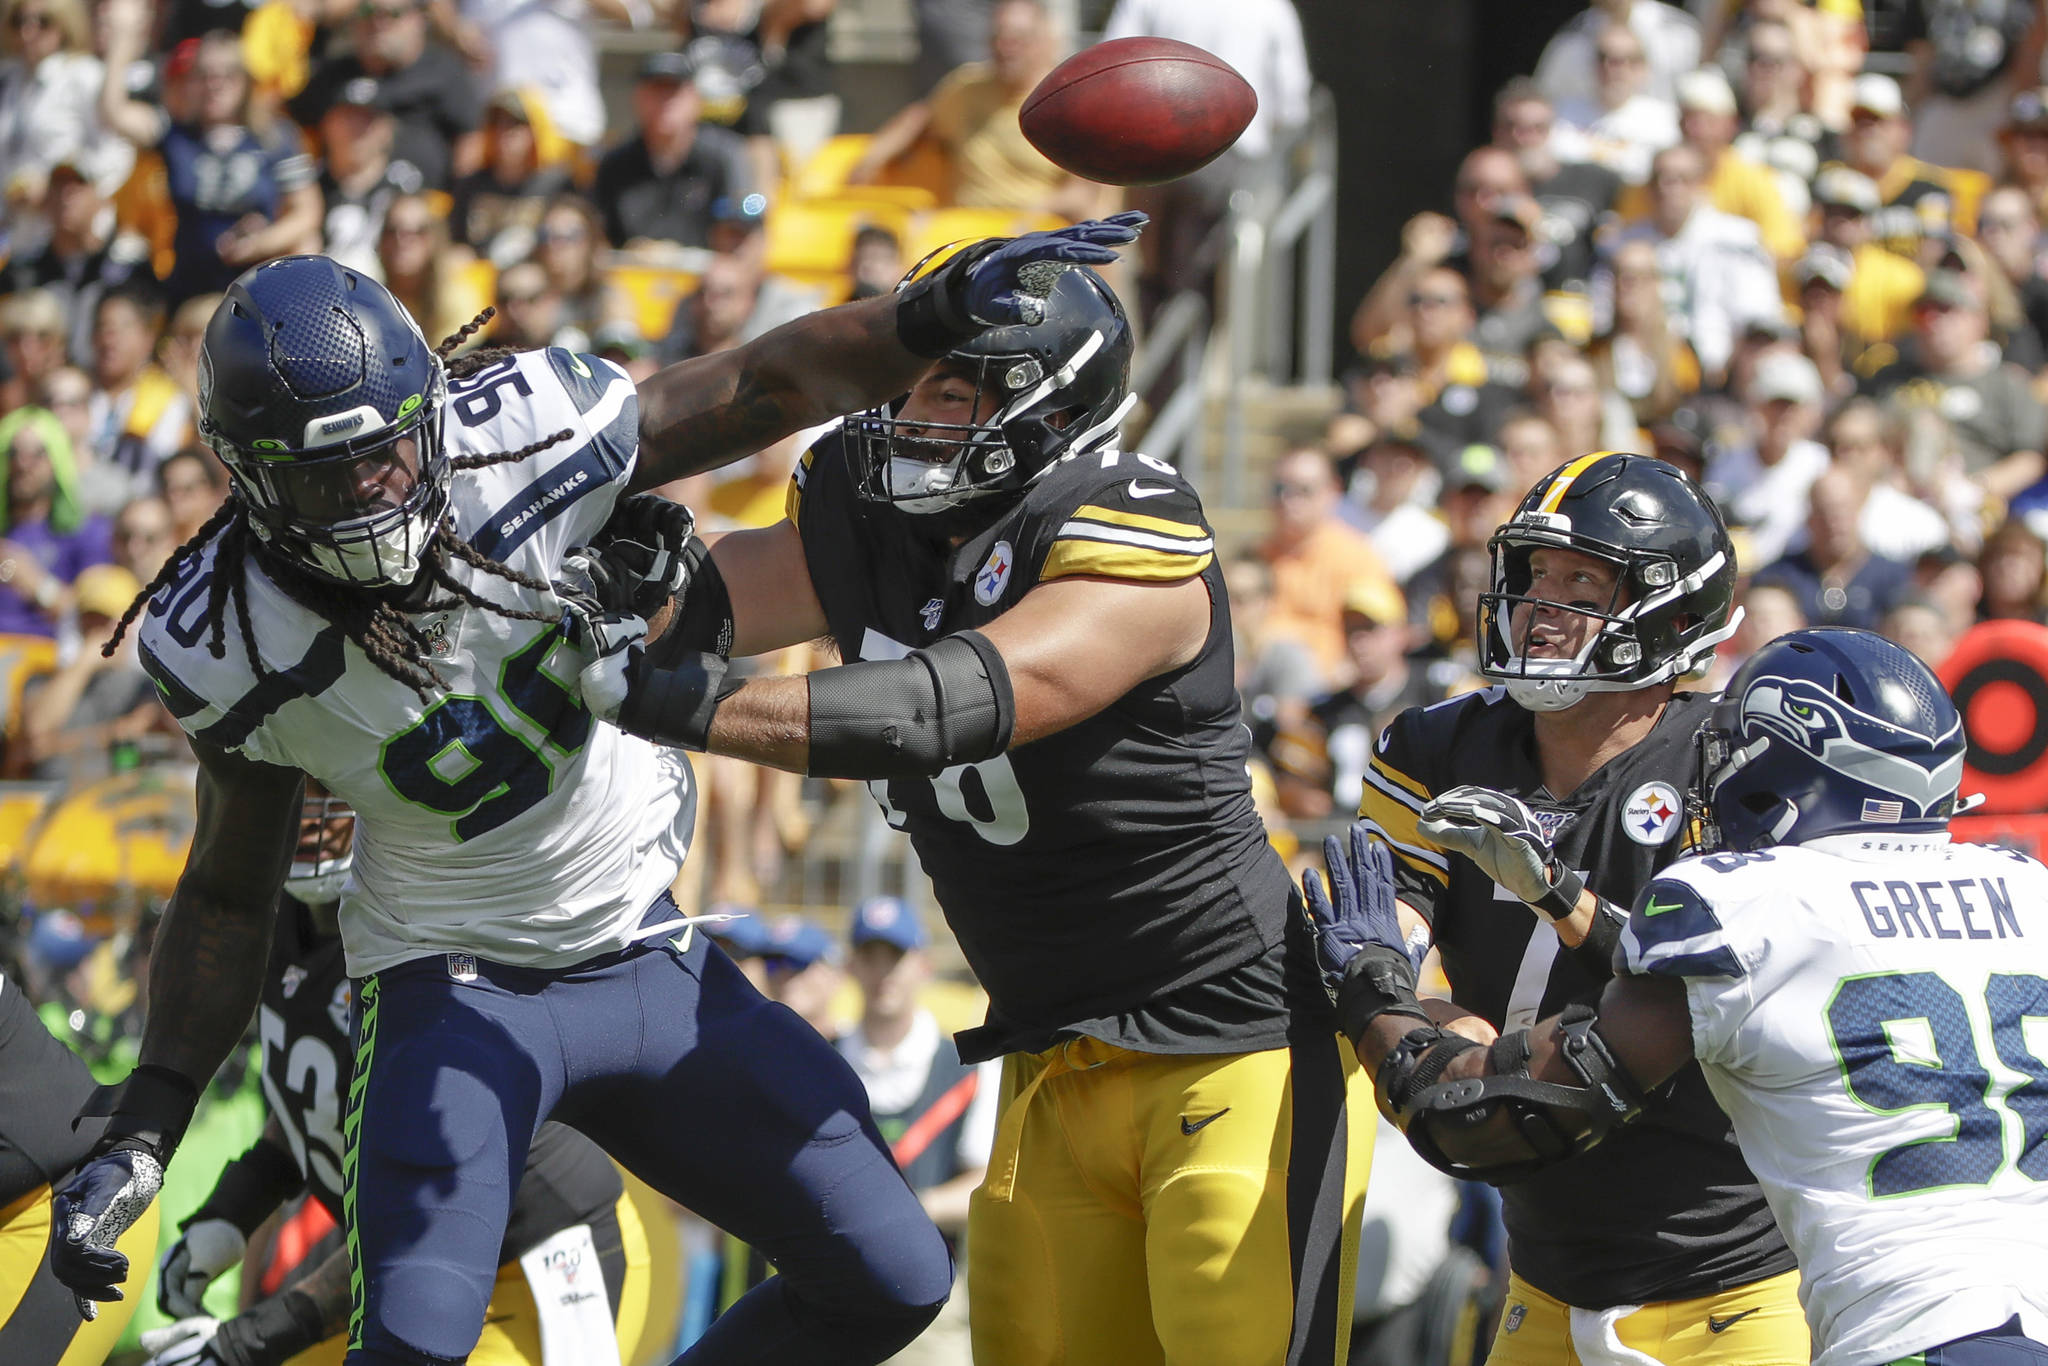 Seattle’s Jadeveon Clowney (90) deflects a pass by Pittsburgh Steelers quarterback Ben Roethlisberger in the first half of Sunday’s NFL game in Pittsburgh. Seattle won, 28-26. (AP Photo/Gene J. Puskar)